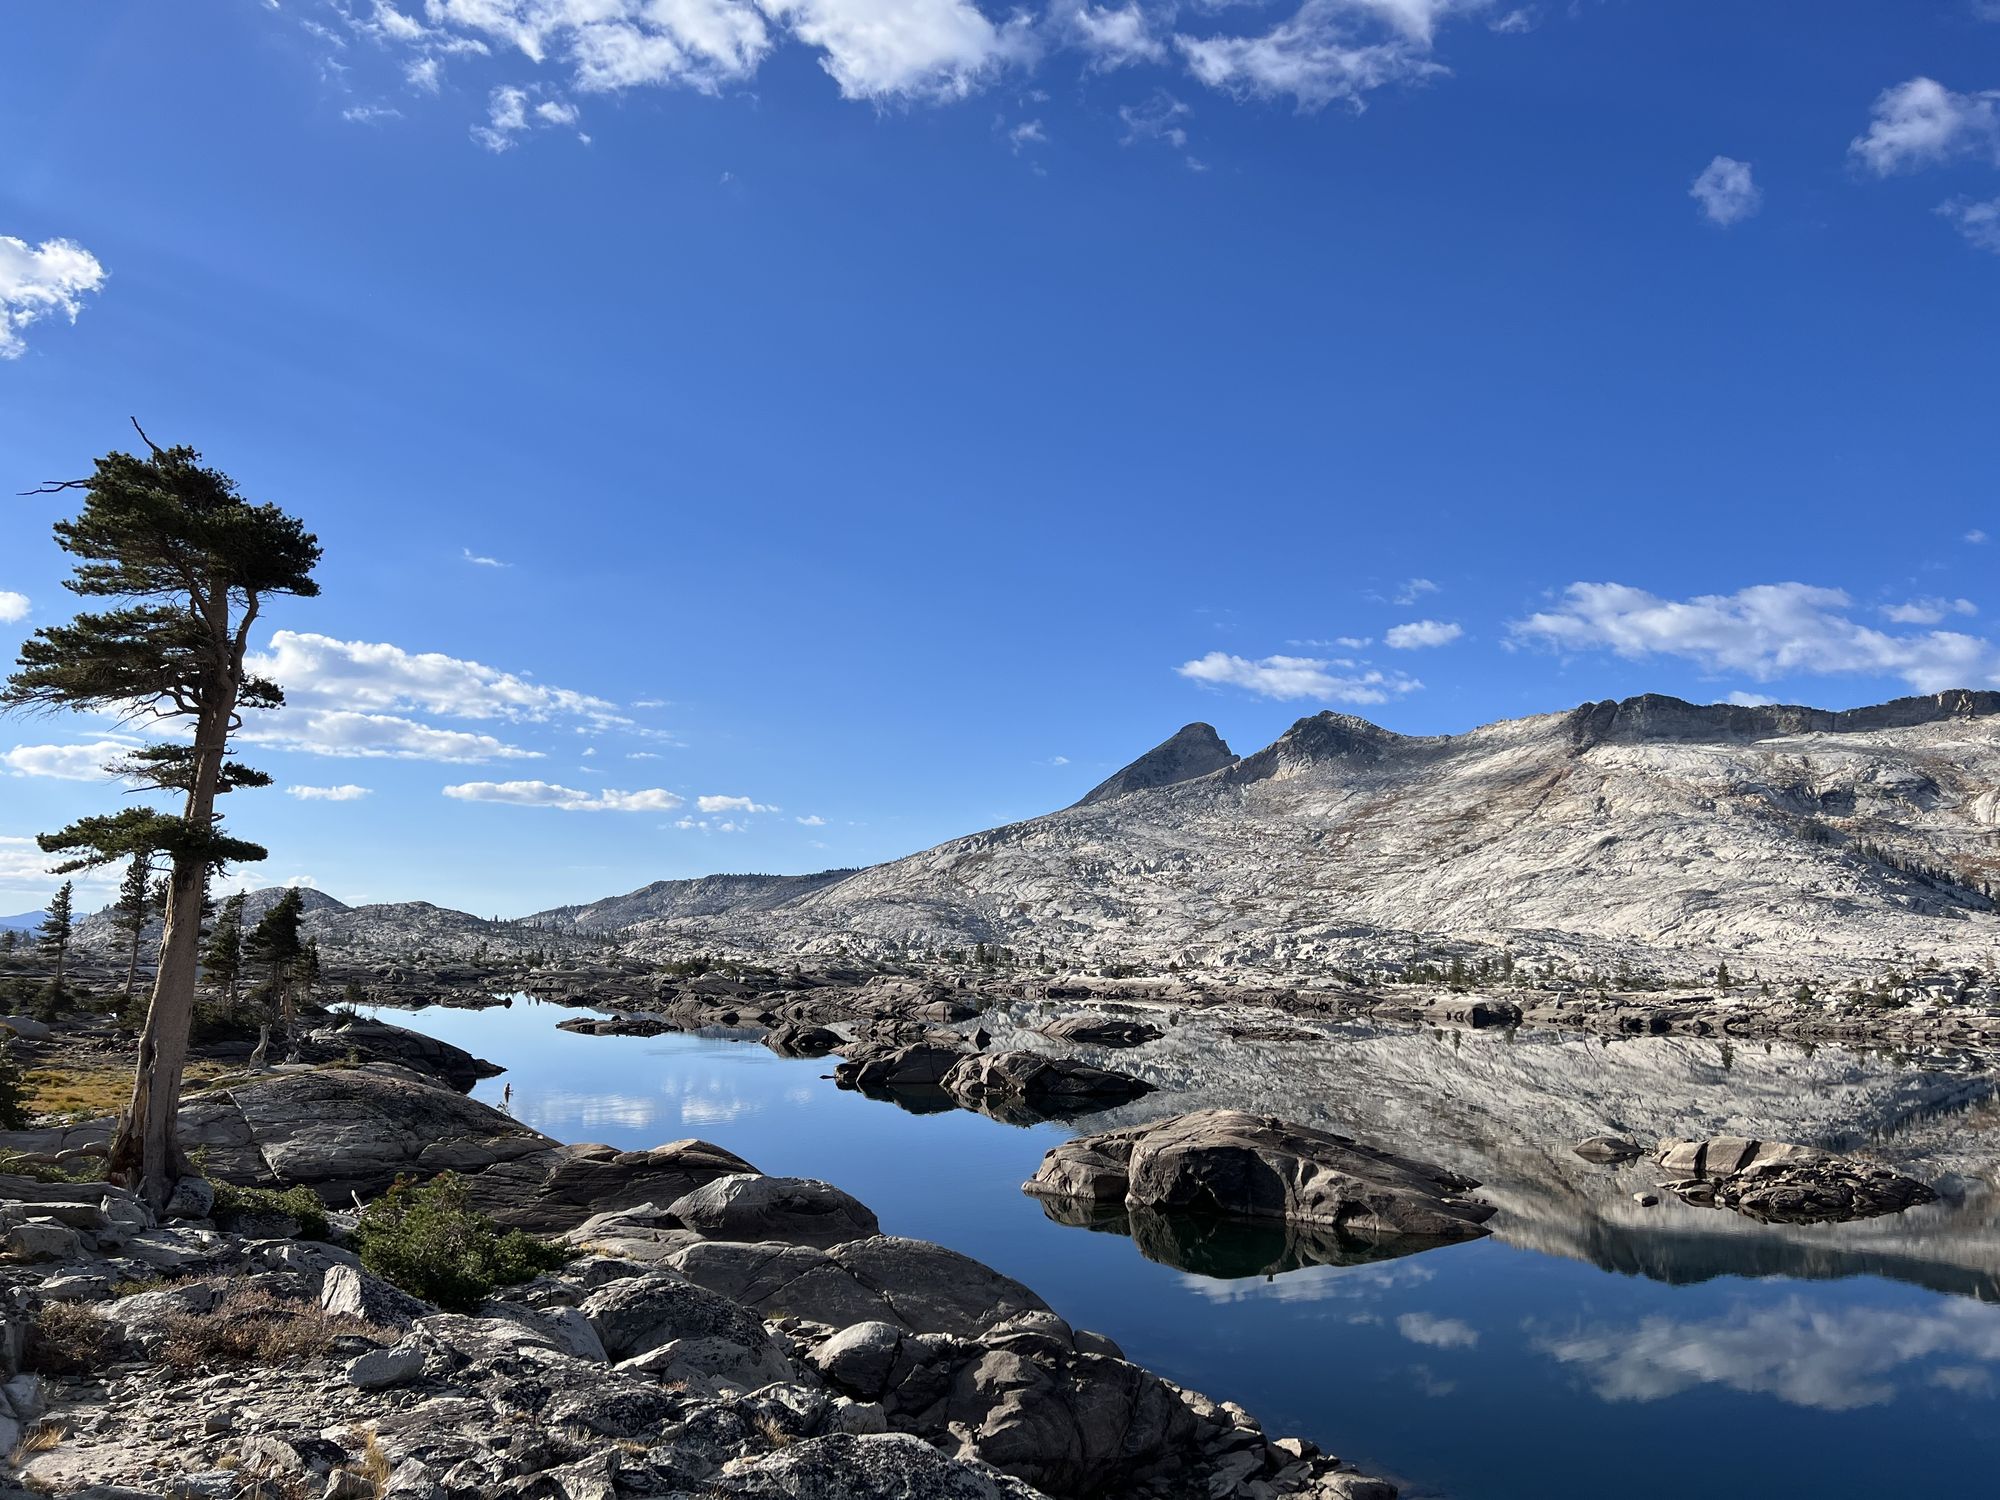 Exploring the desolate parts of Desolation Wilderness